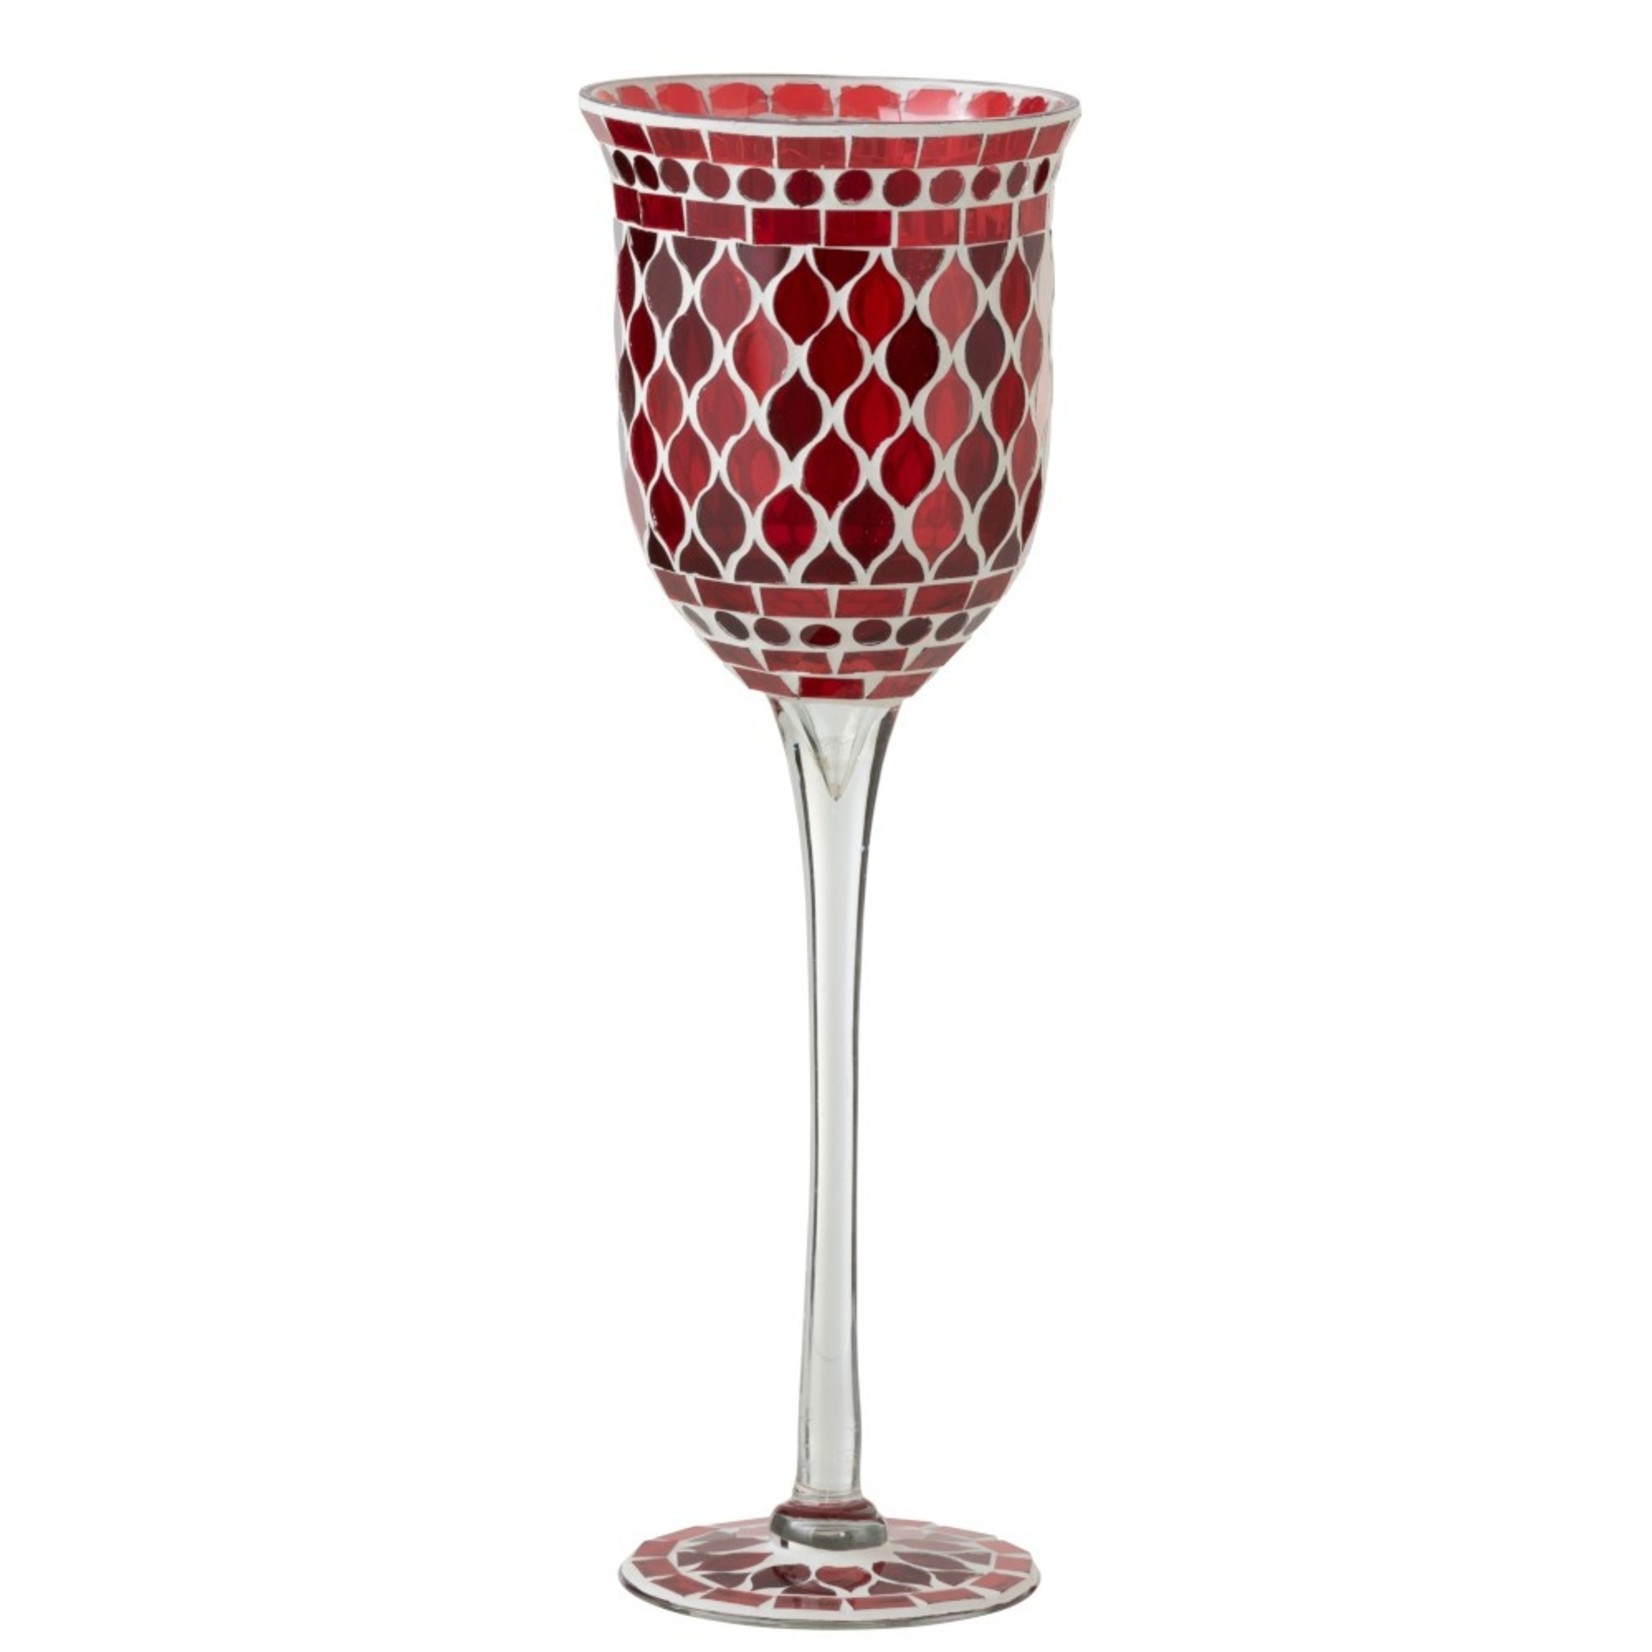 J-Line Tealight Holder Glass On Foot Mosaic Red White - Large